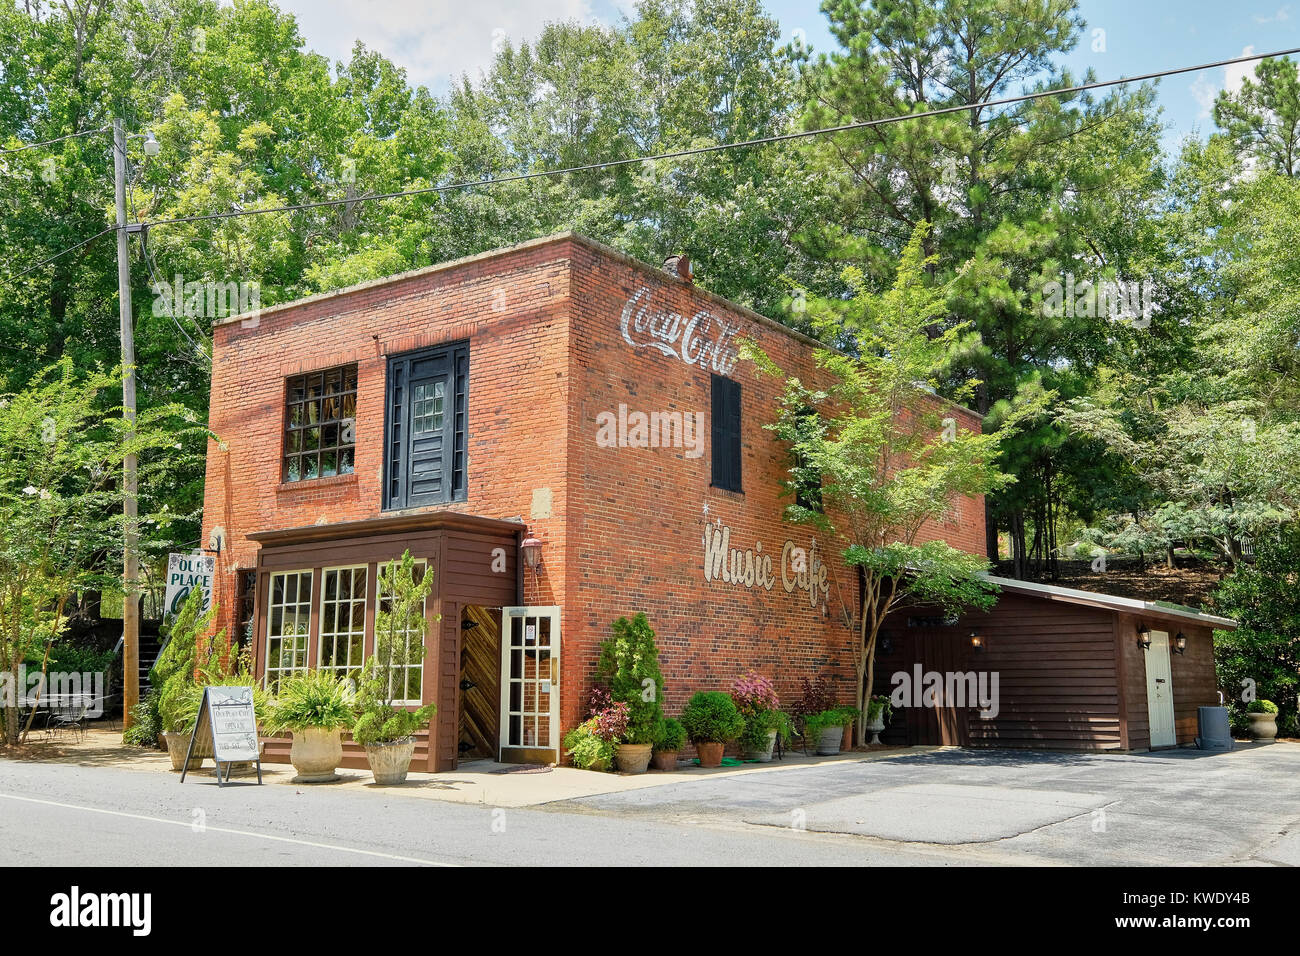 Our Place Cafe is a restaurant in rural Wetumpka, Alabama, USA, repurposing an old vintage brick building wth advertising on the side. Stock Photo